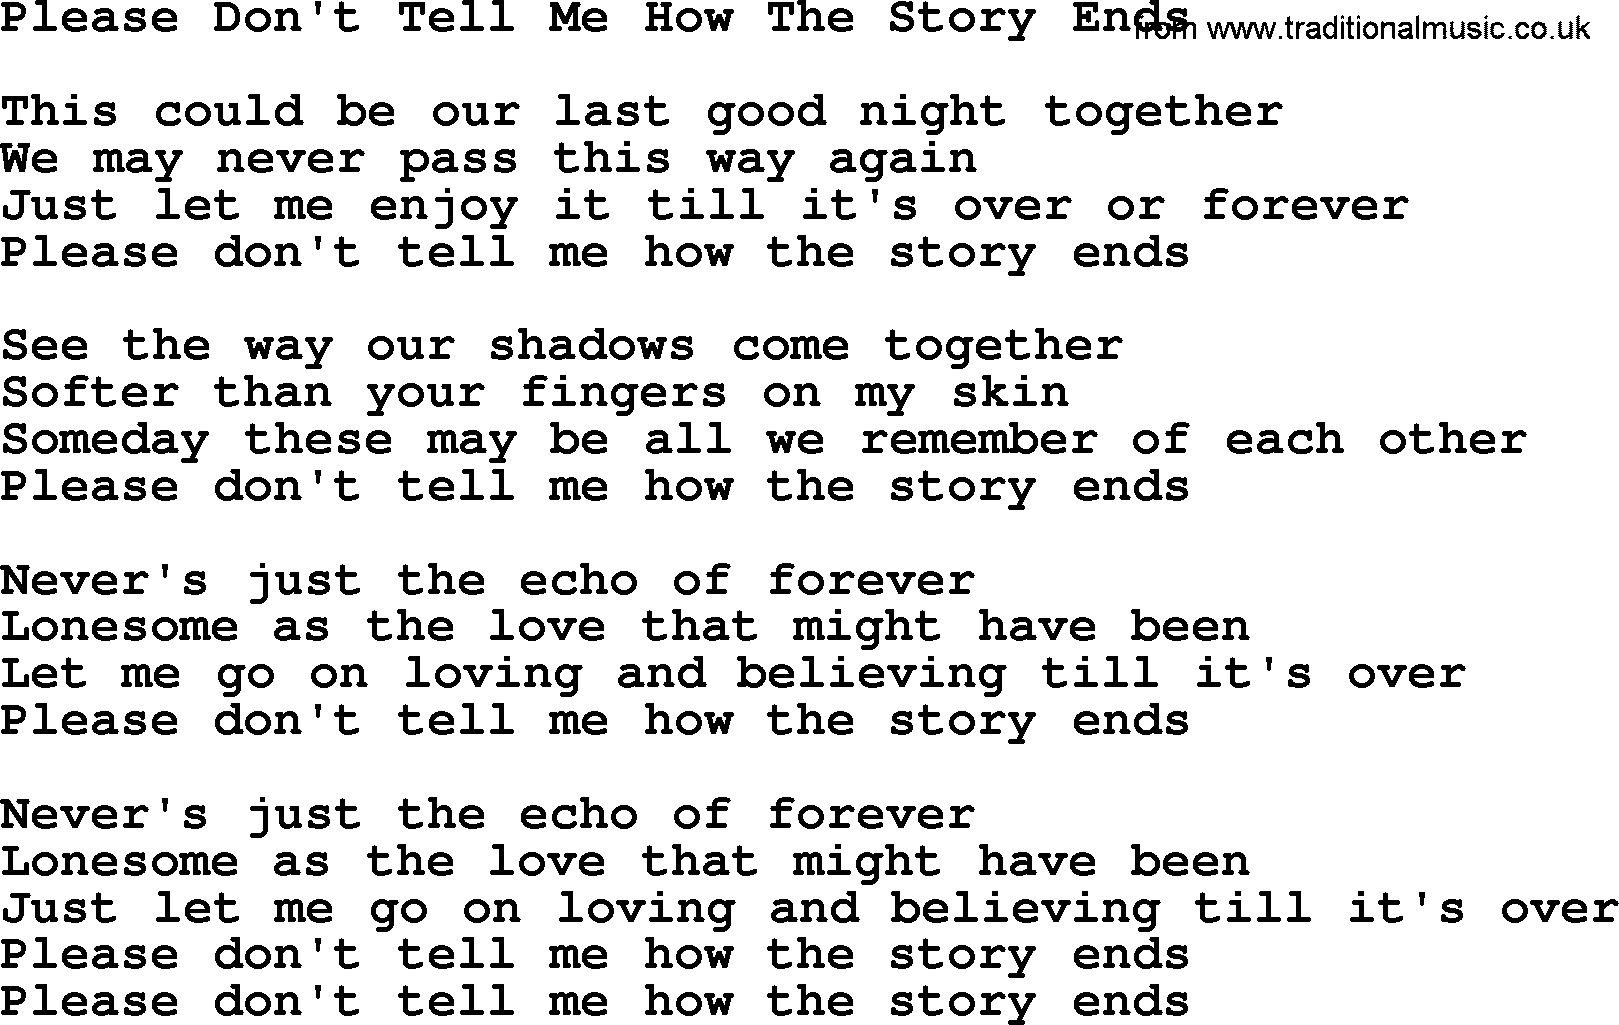 Willie Nelson song: Please Don't Tell Me How The Story Ends lyrics